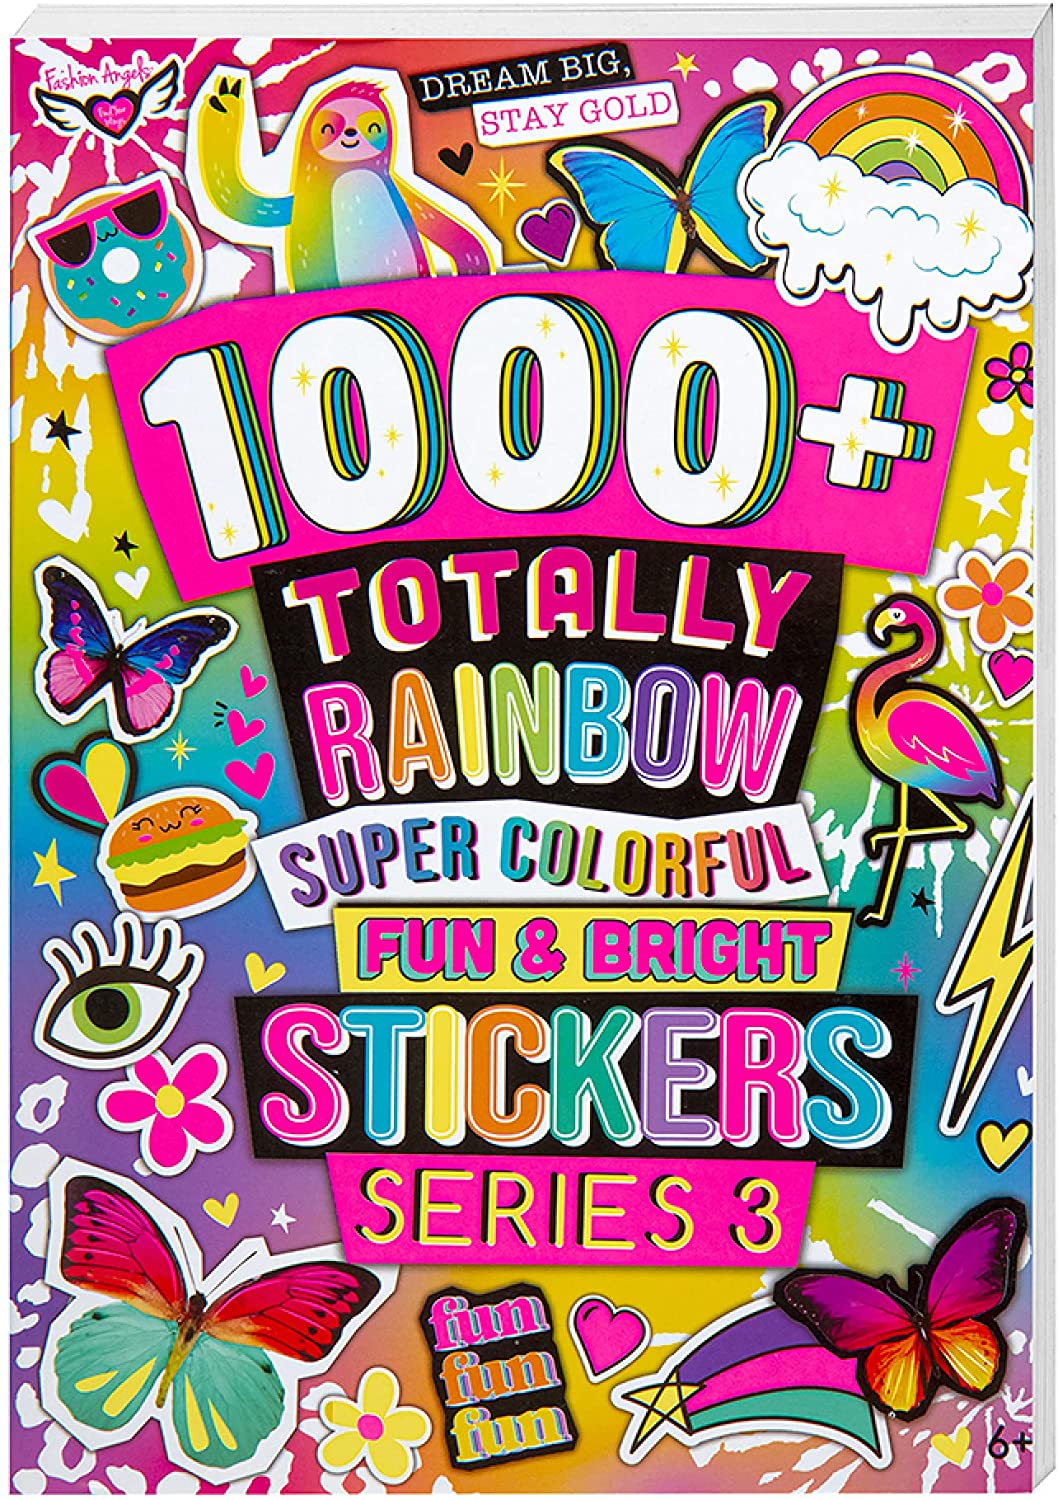 1000+ Totally Rainbow Super Colorful Stickers